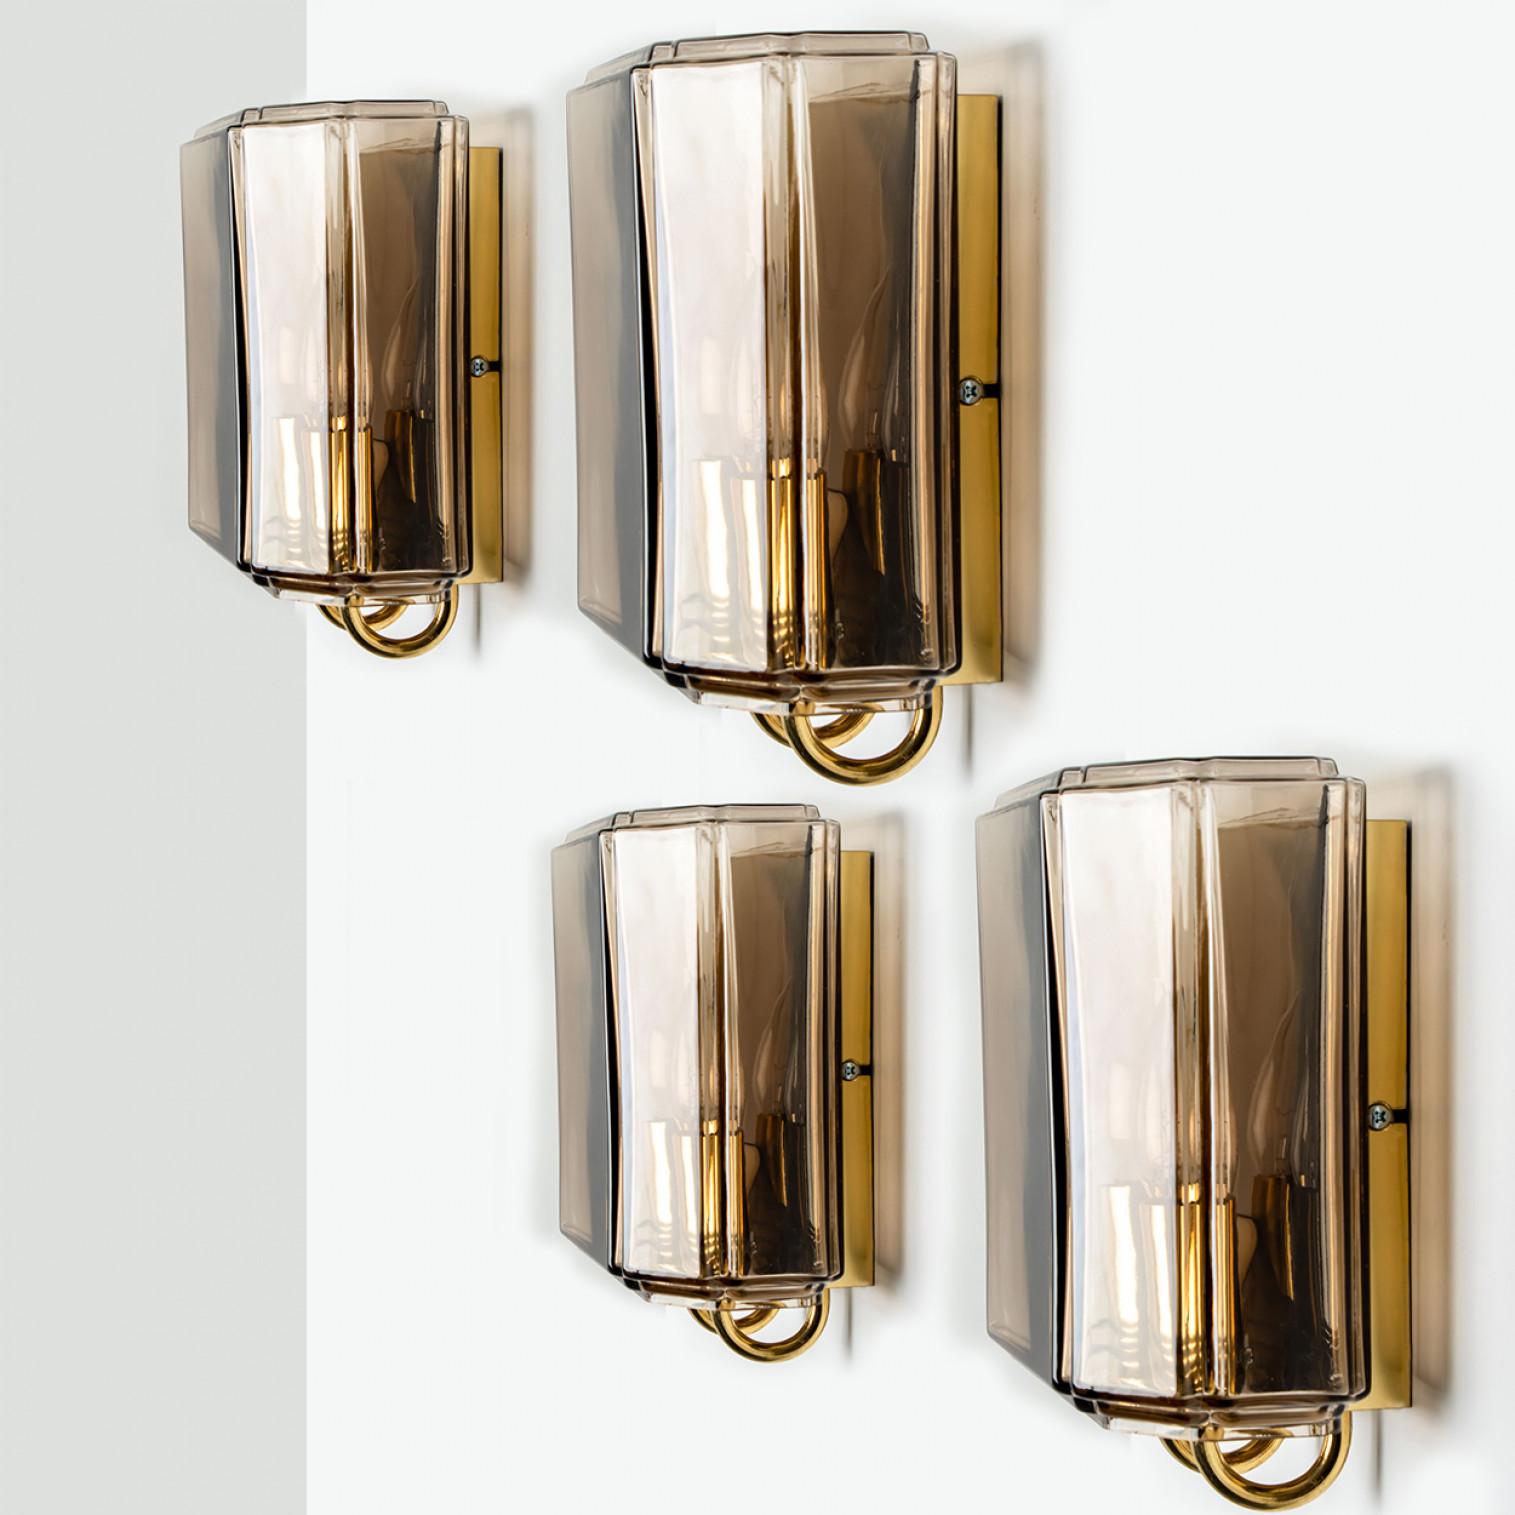 One of the two Pairs of Smoked Glass Wall Lights Sconces by Glashütte Limburg, 1 For Sale 1